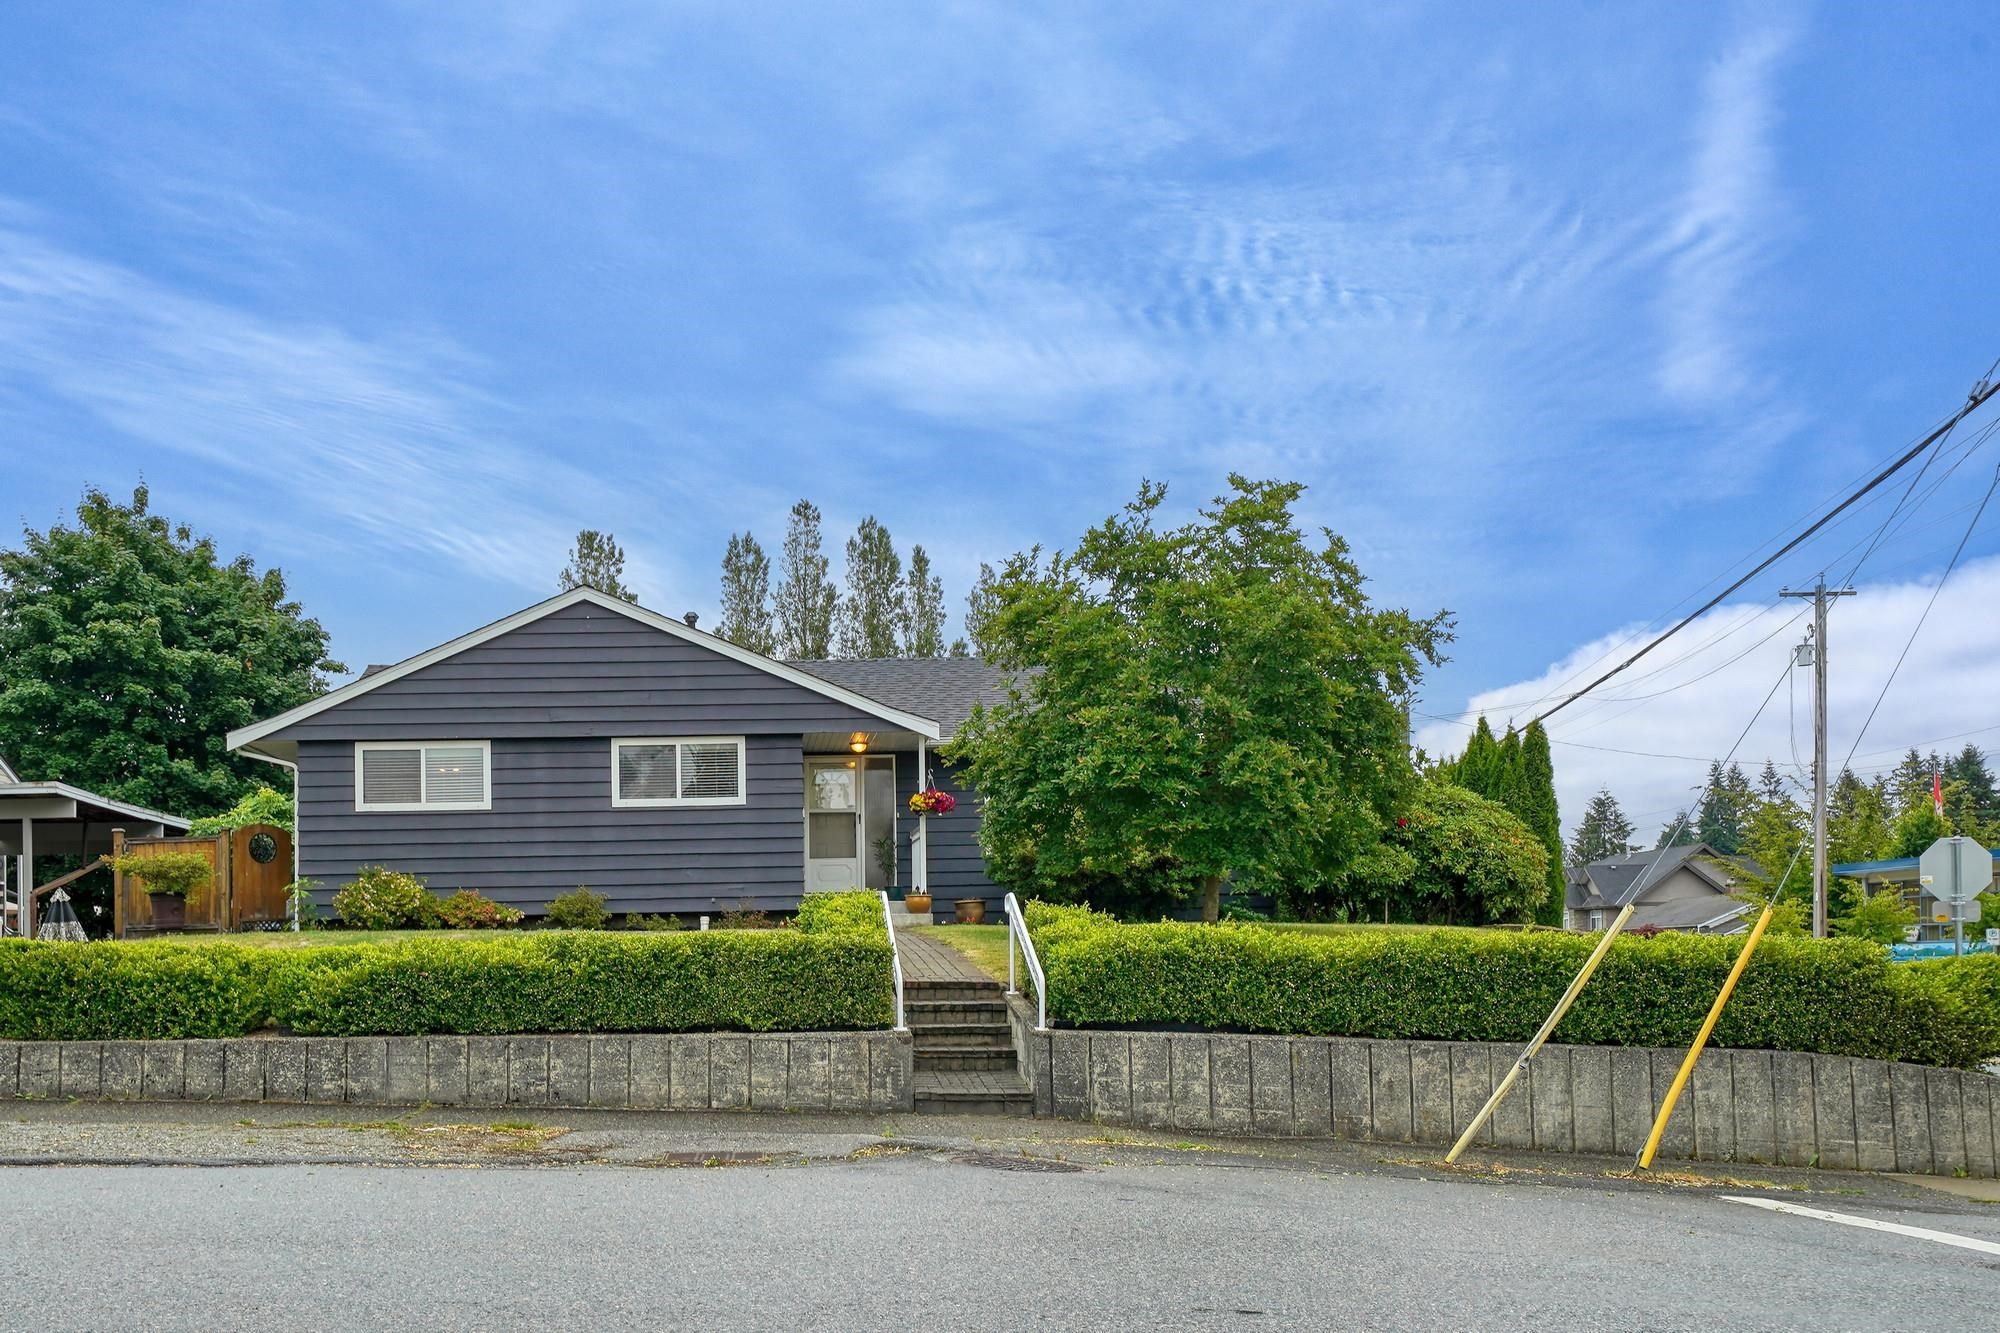 We have sold a property at 701 ROBINSON ST in Coquitlam